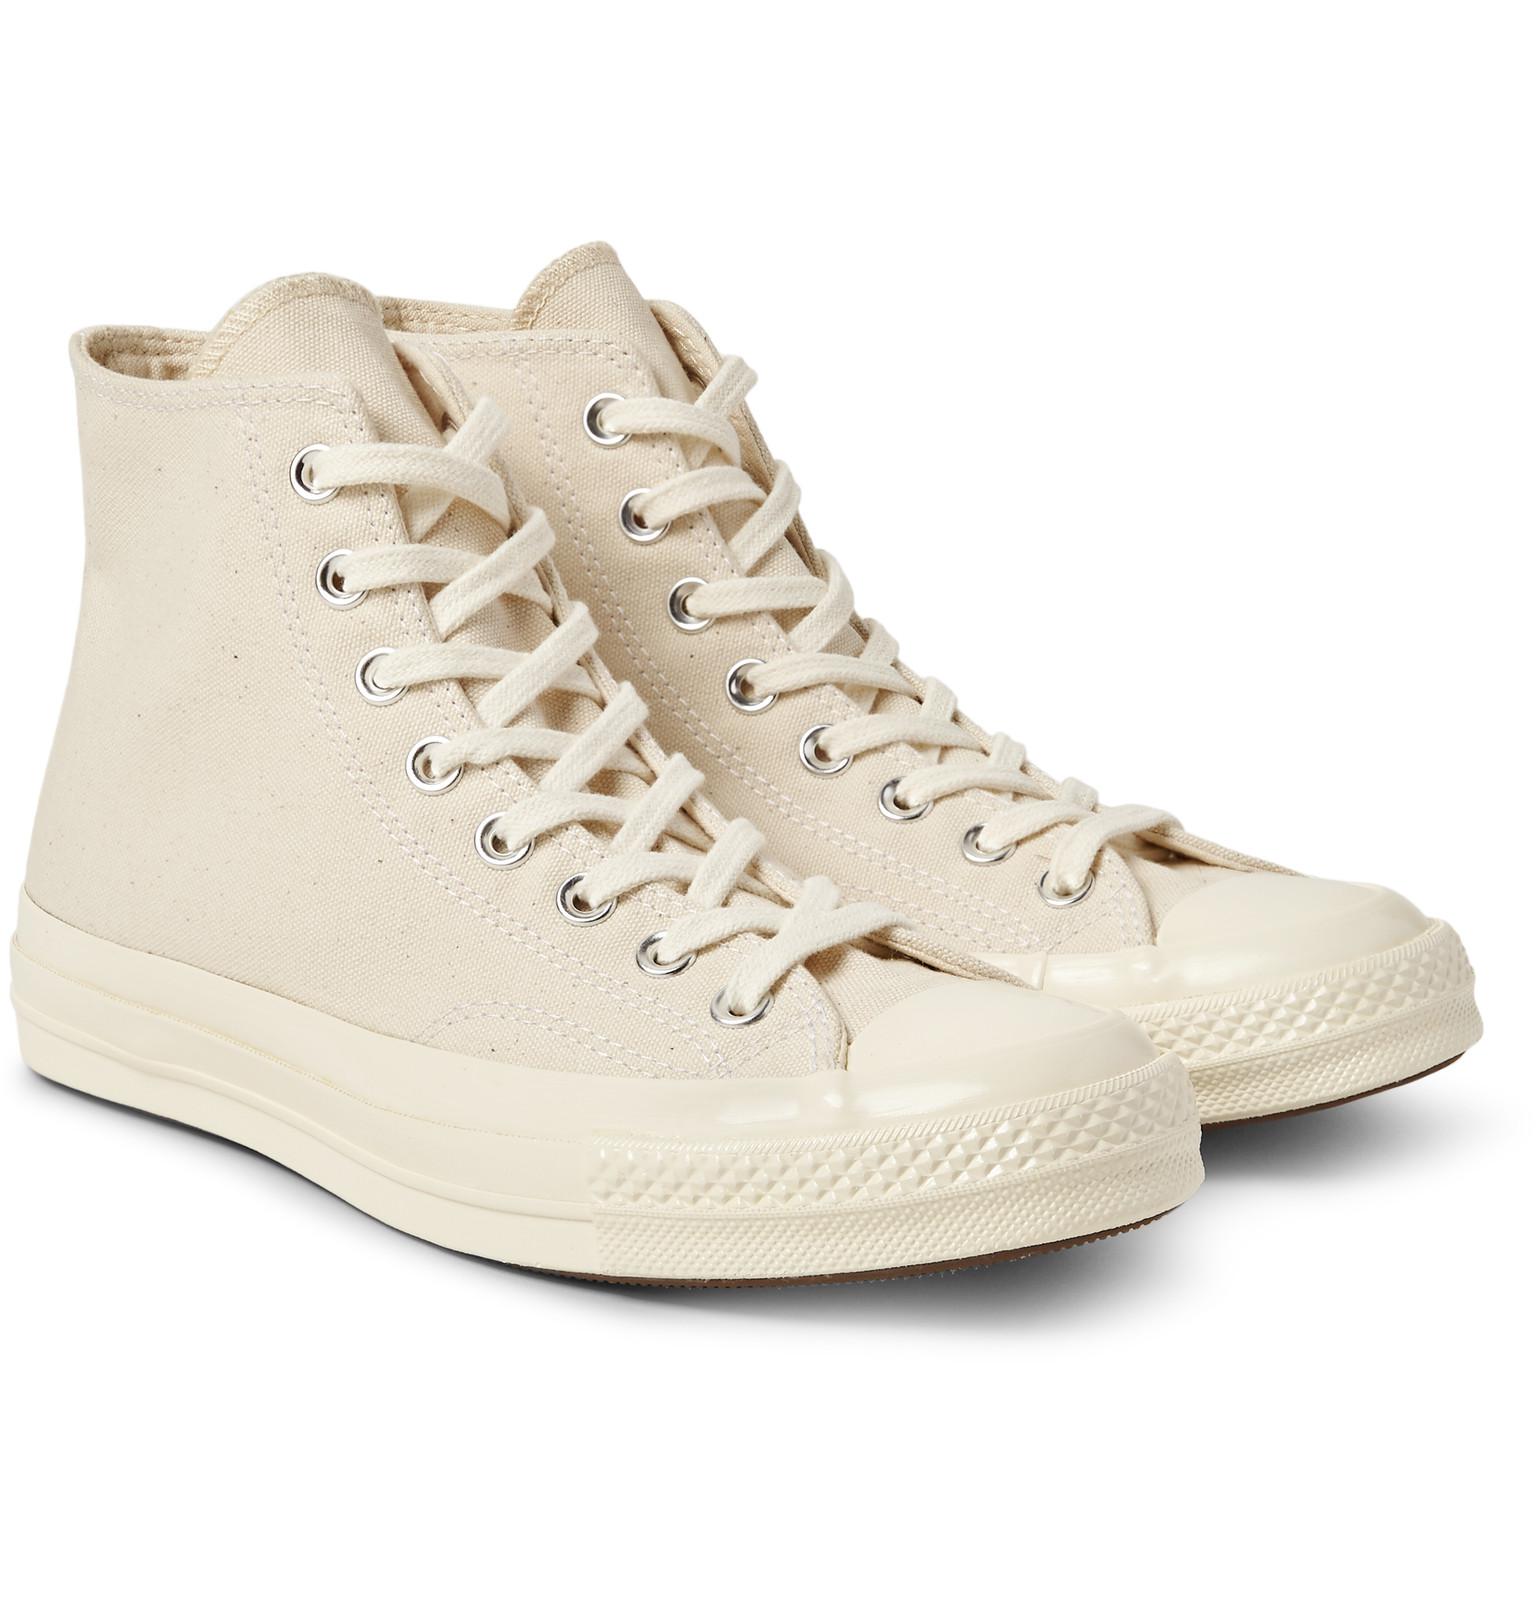 Converse 1970s Chuck Taylor All Star Canvas High-top Sneakers in Ecru ...